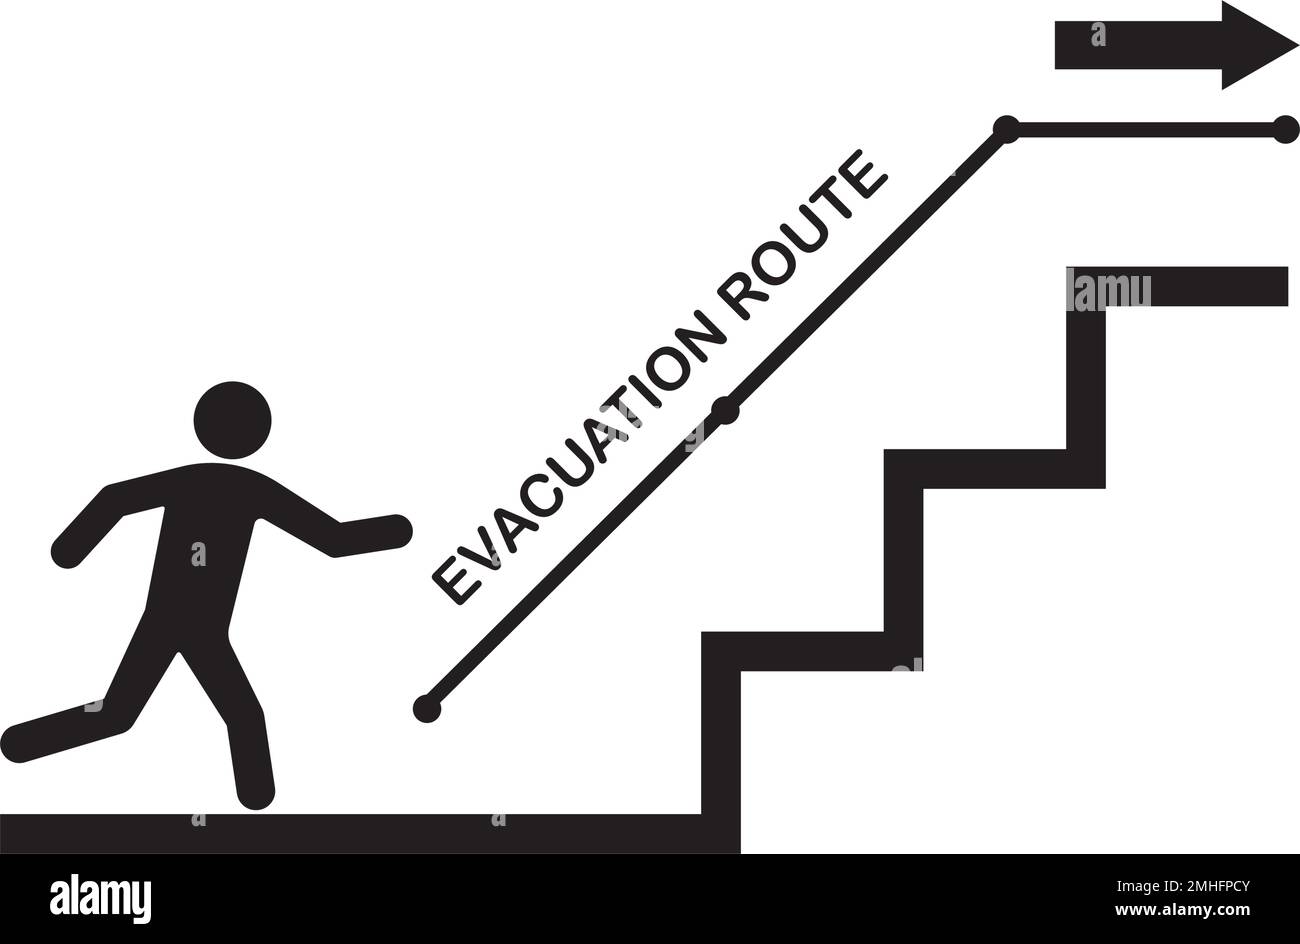 evacuation route or emergency stairs icon.vector illustration symbol design. Stock Vector